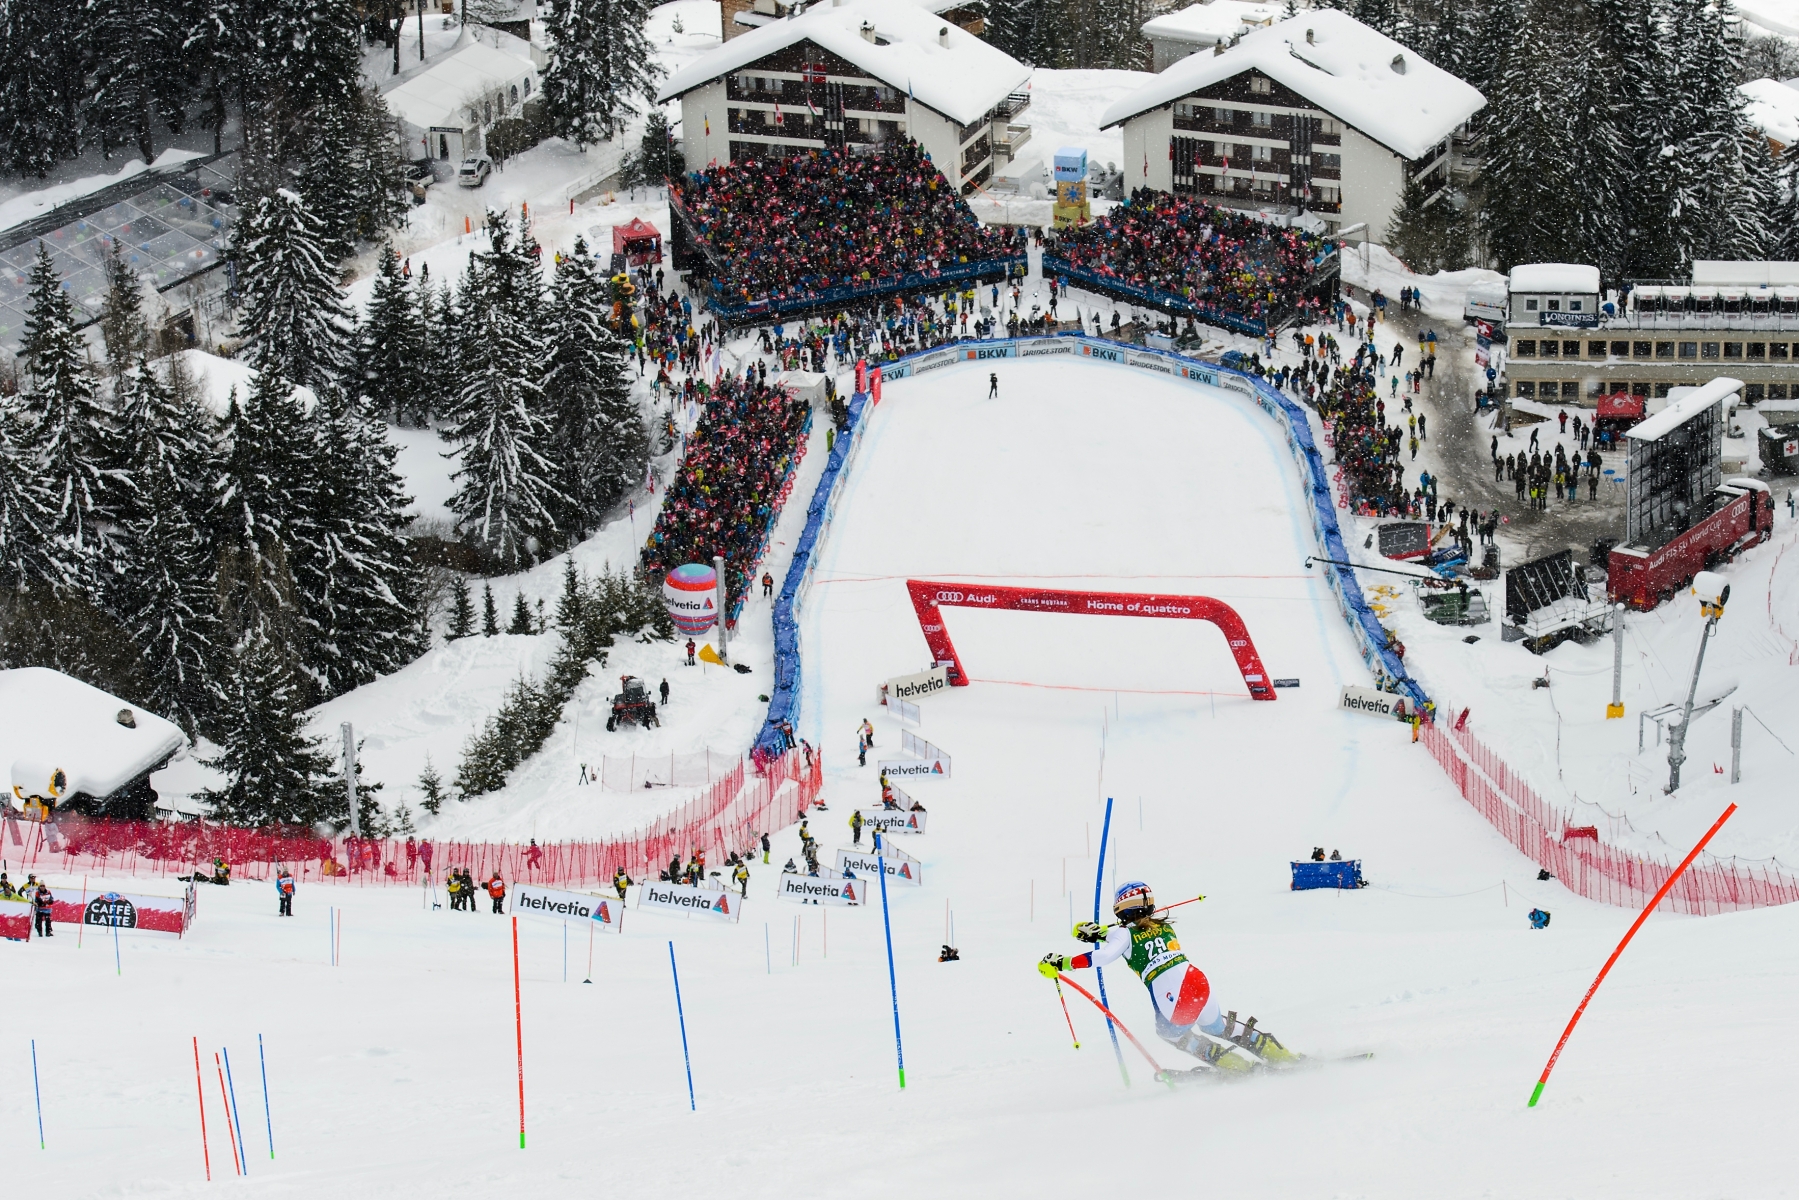 Charlotte Chable of Switzerland in action during the second run of the women's Slalom race of the FIS Alpine Ski World Cup season in Crans-Montana, Switzerland, Monday, February 15, 2016. (KEYSTONE/Jean-Christophe Bott)ski SKI ALPIN WELTCUP 2015/16 CRANS-MONTANA